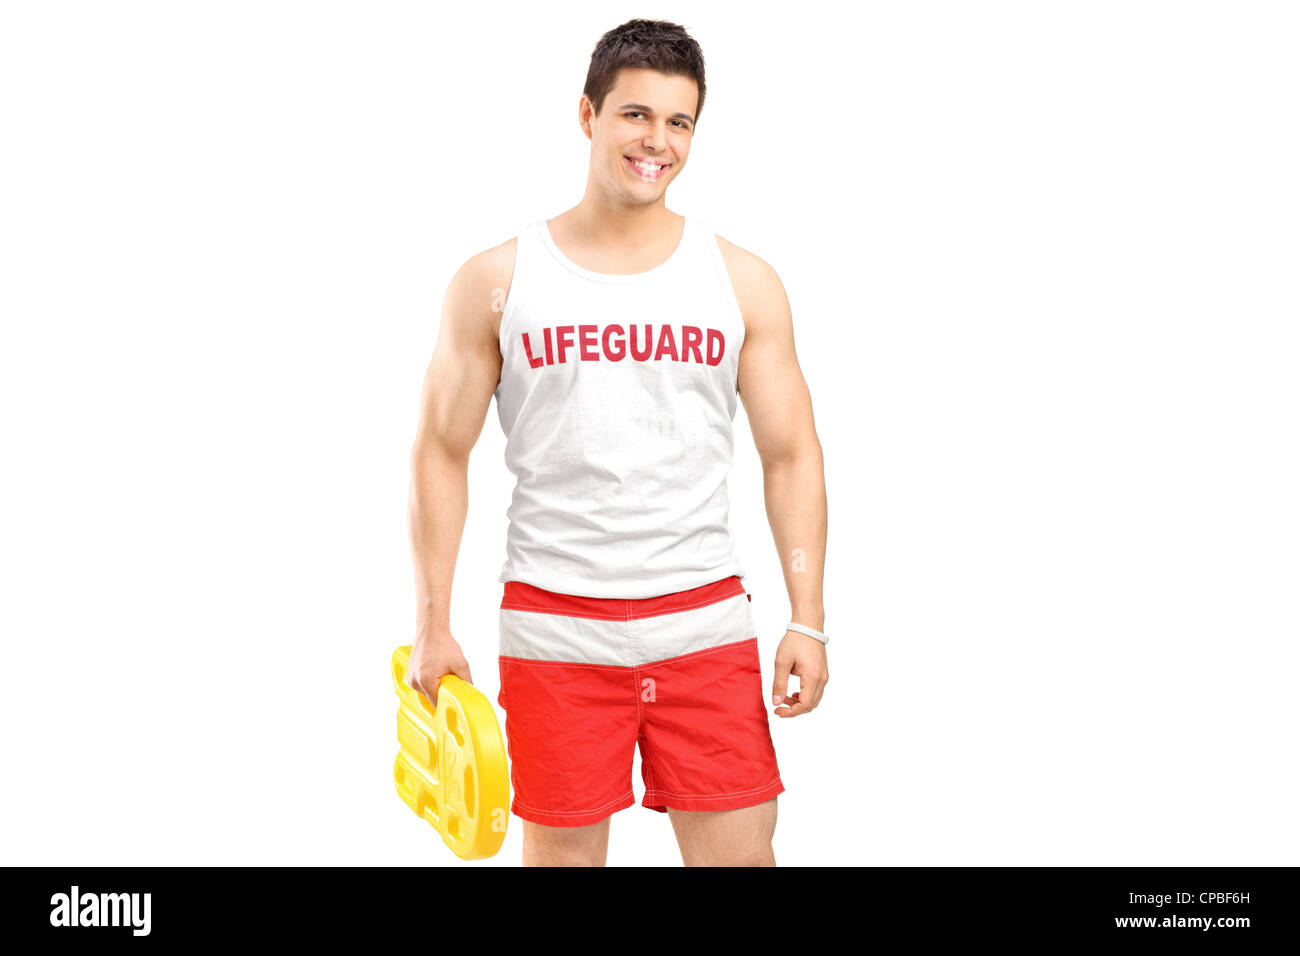 A smiling lifeguard on duty posing isolated on white background Stock Photo